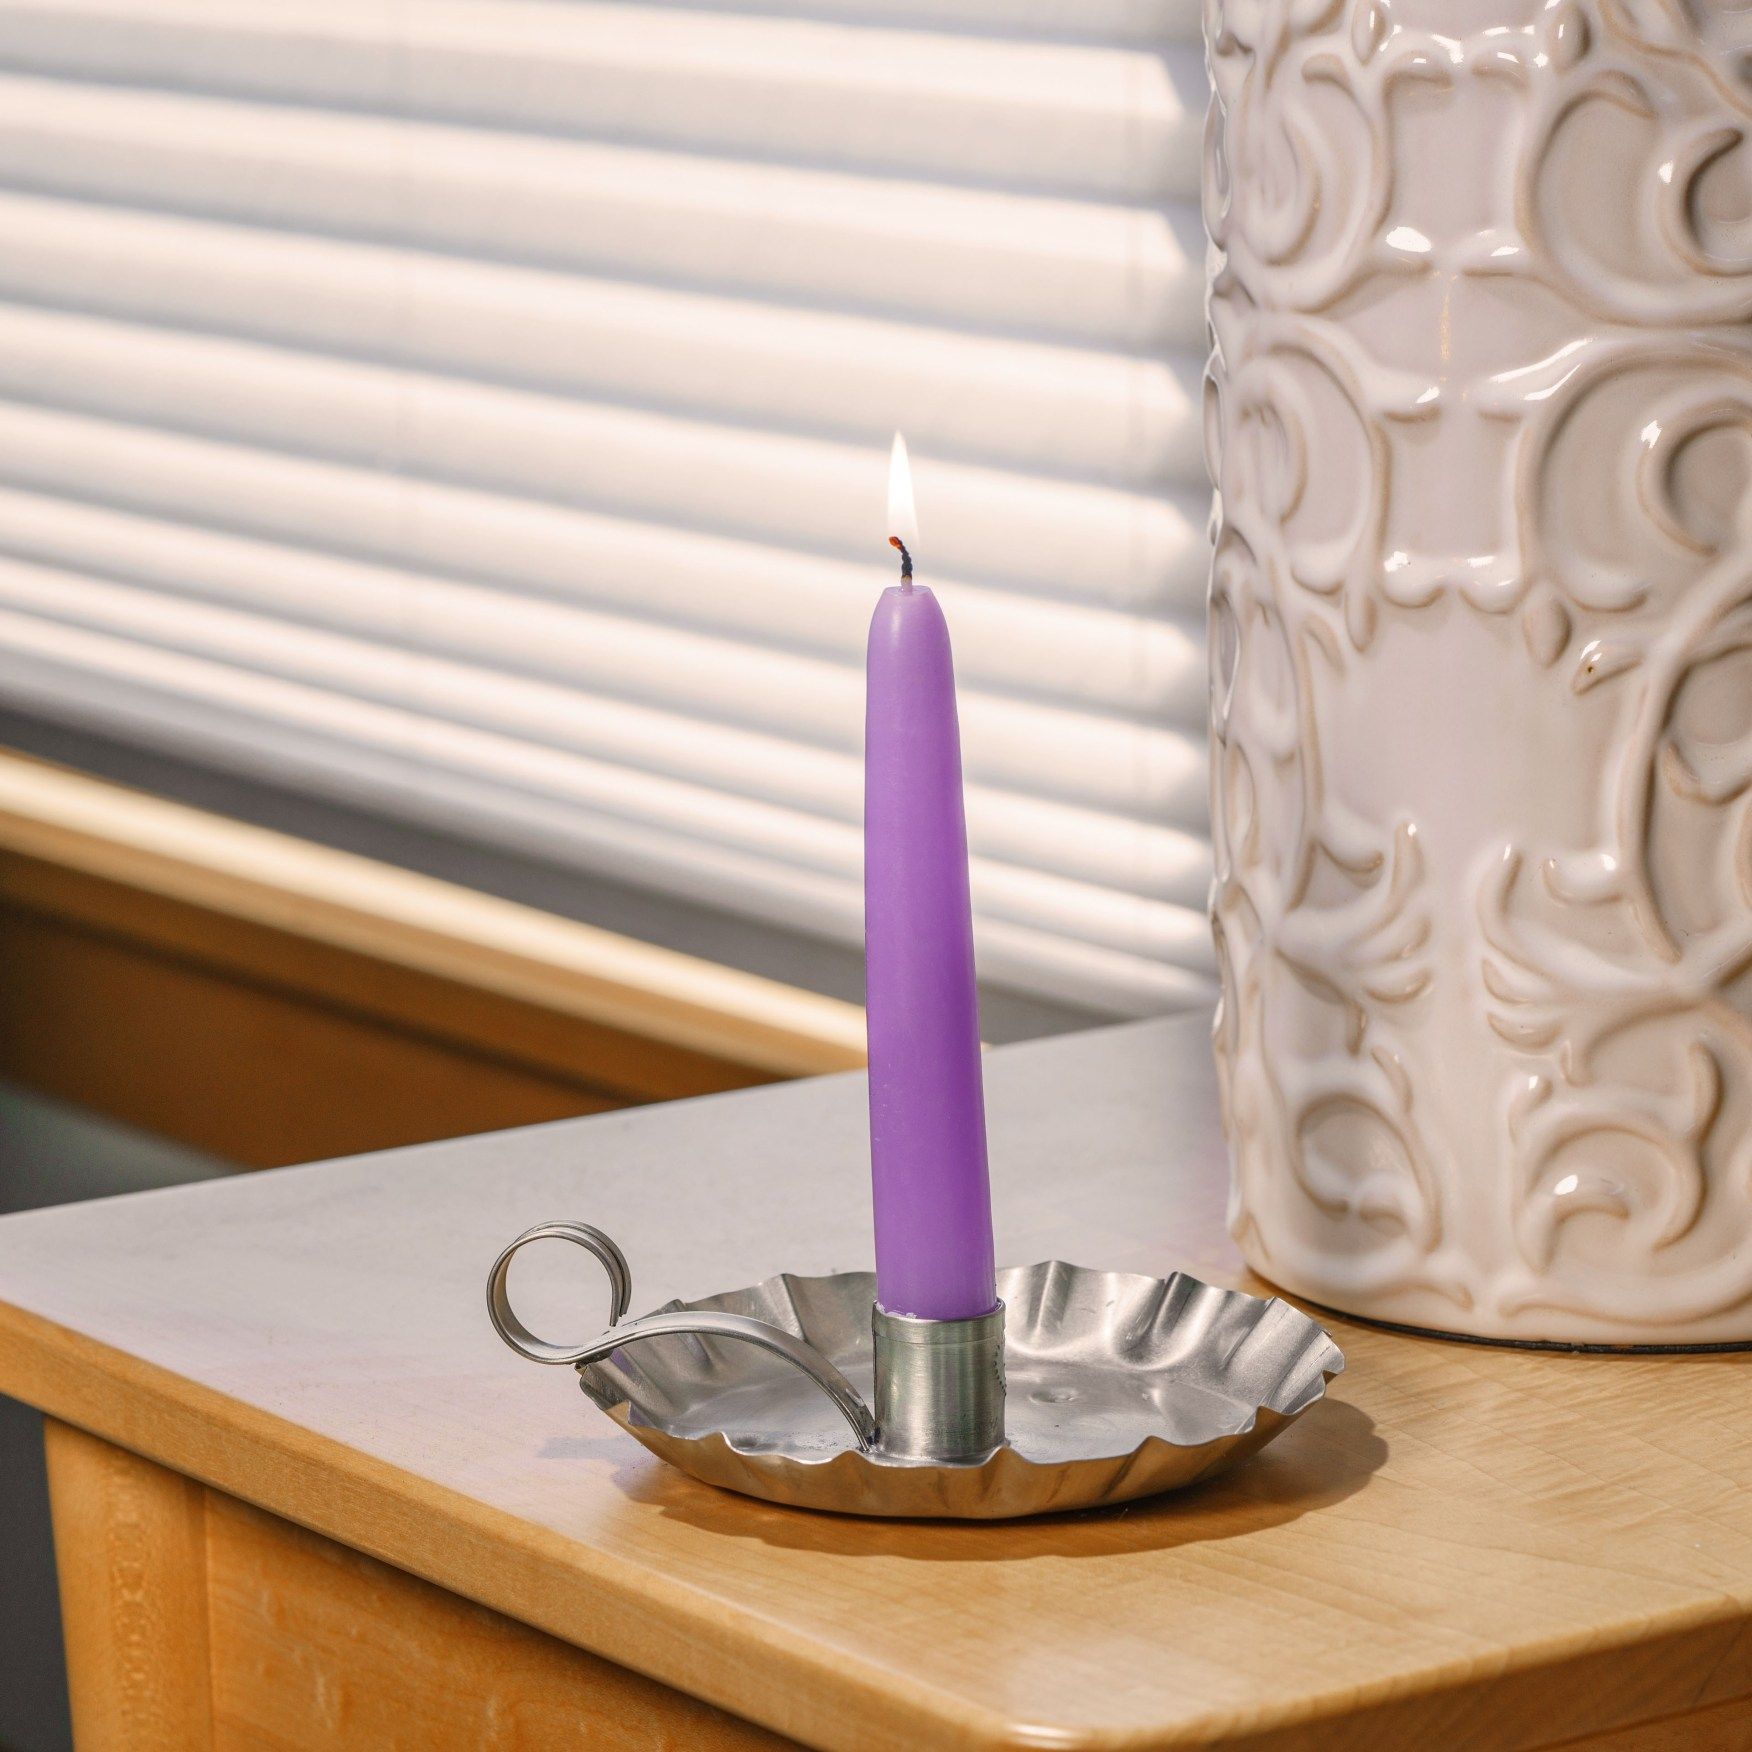 How To Make Dipped Candles